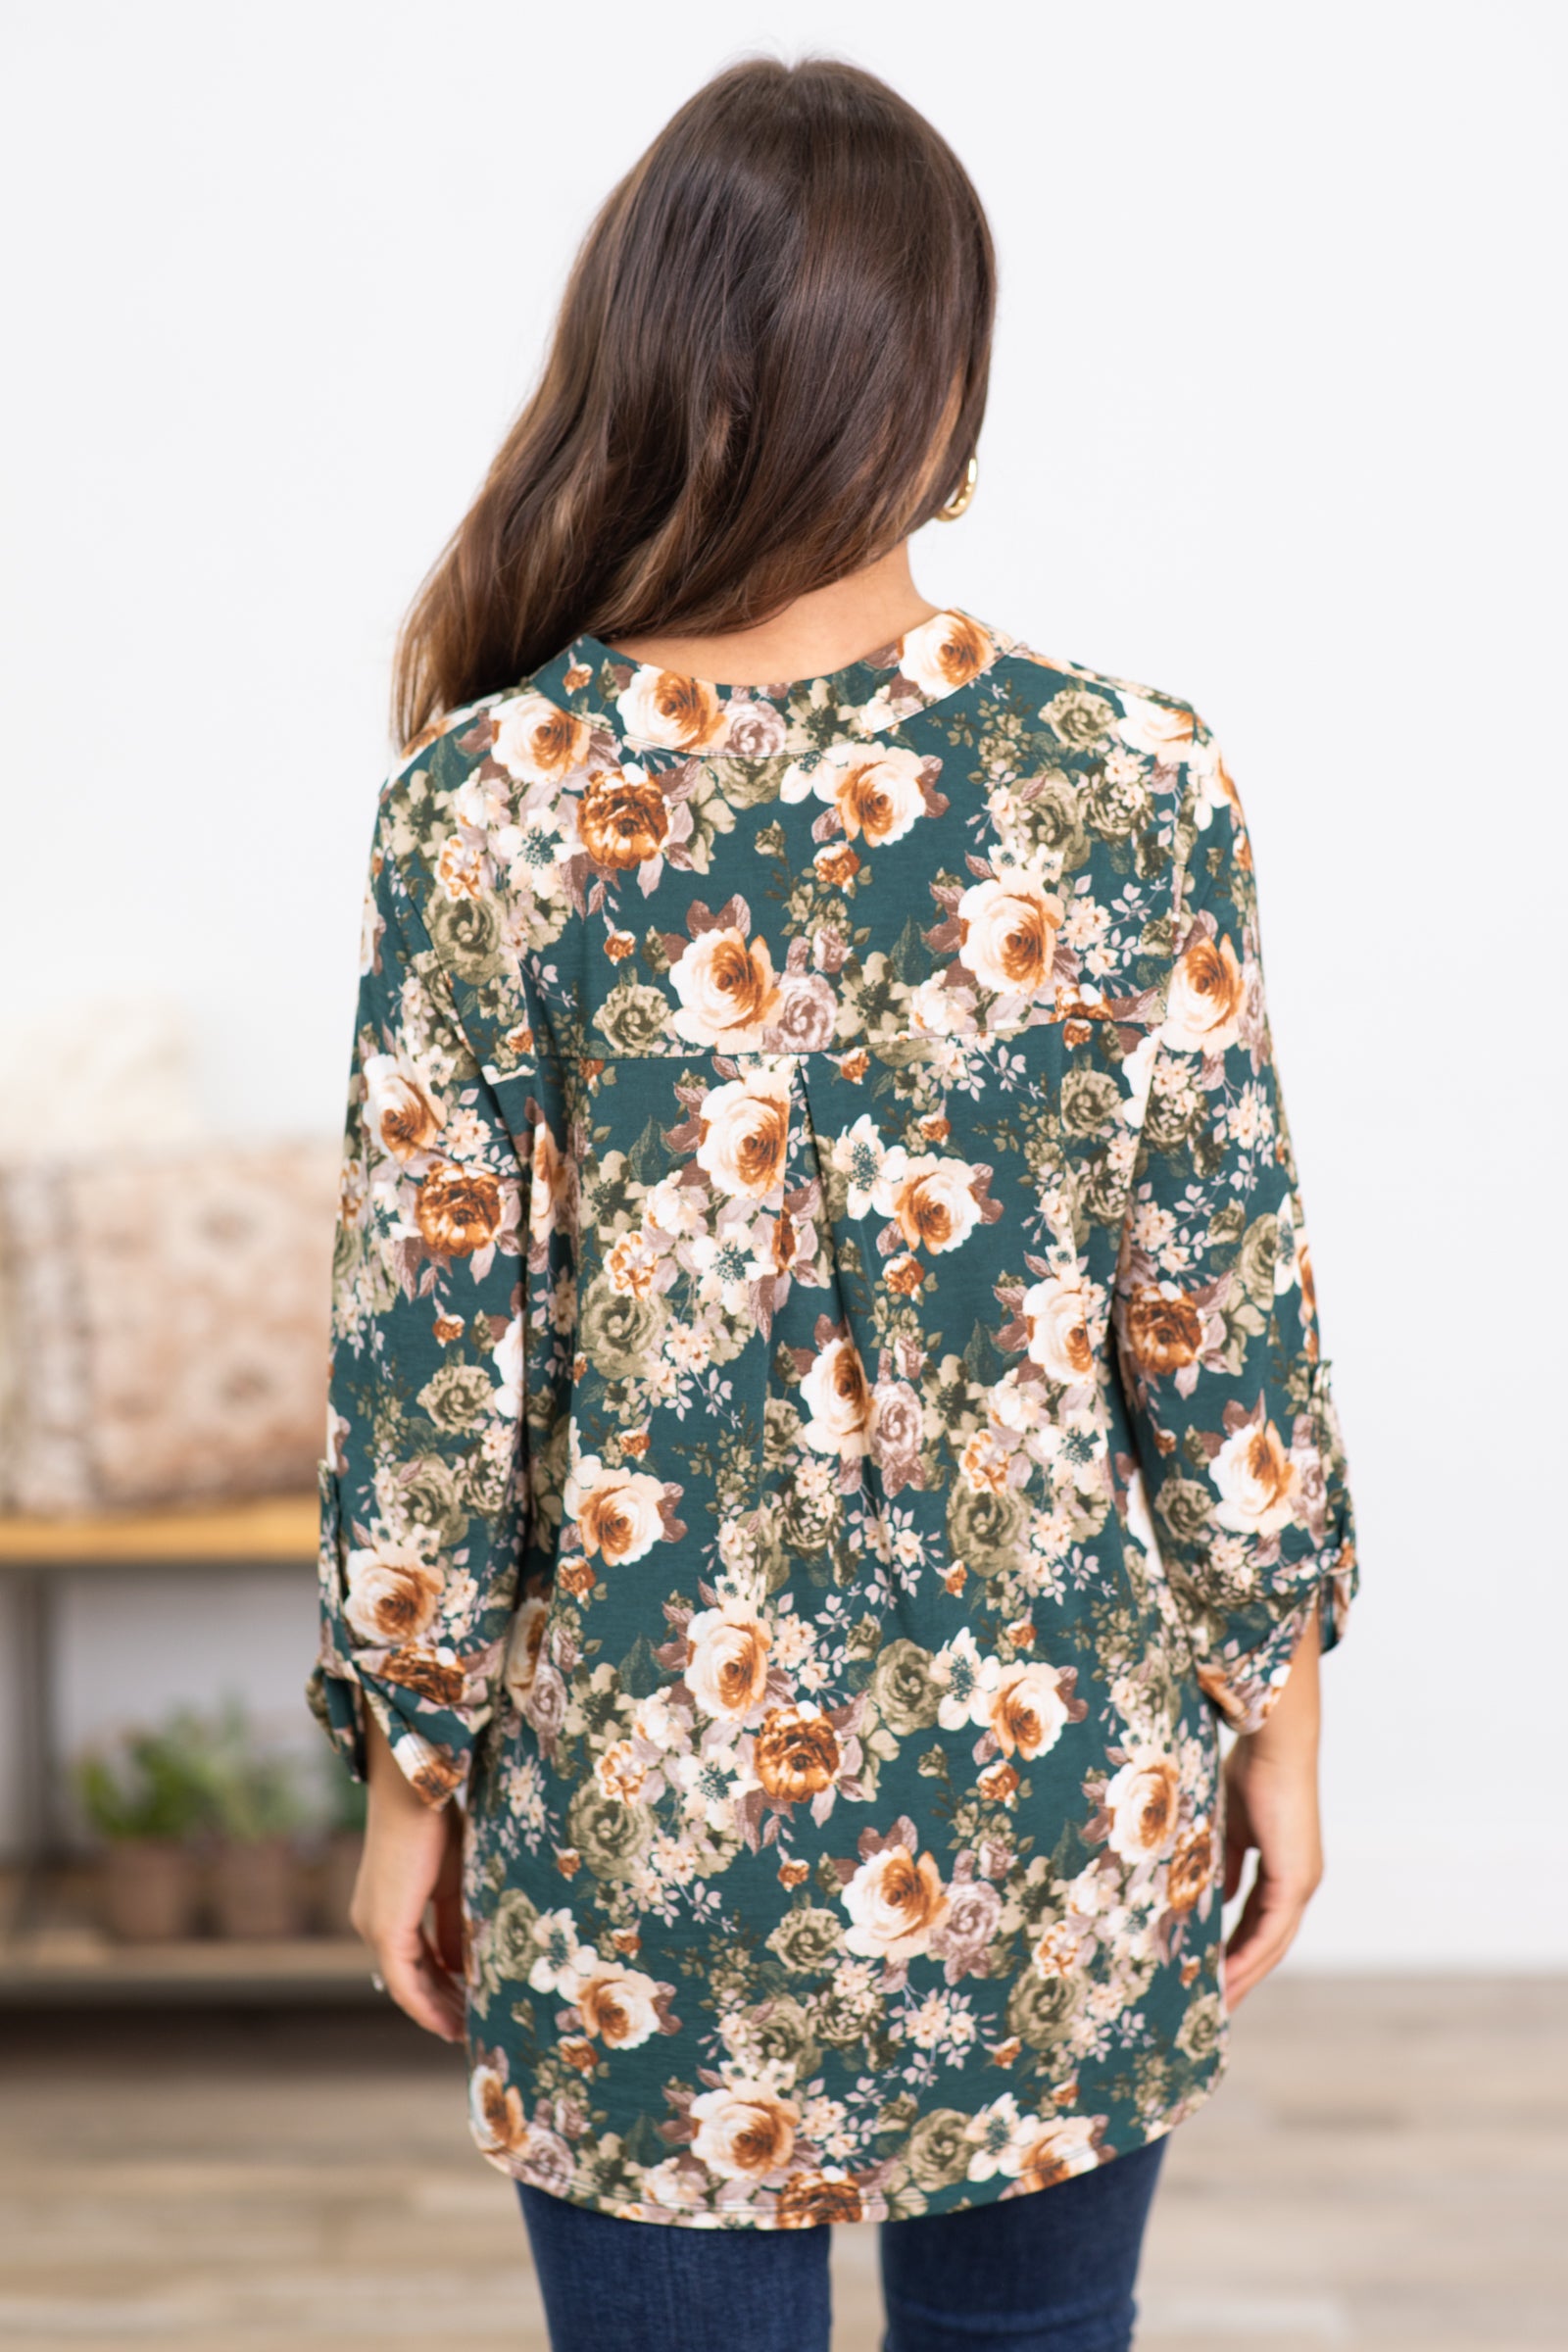 Emerald Green and Ivory Floral Print Top